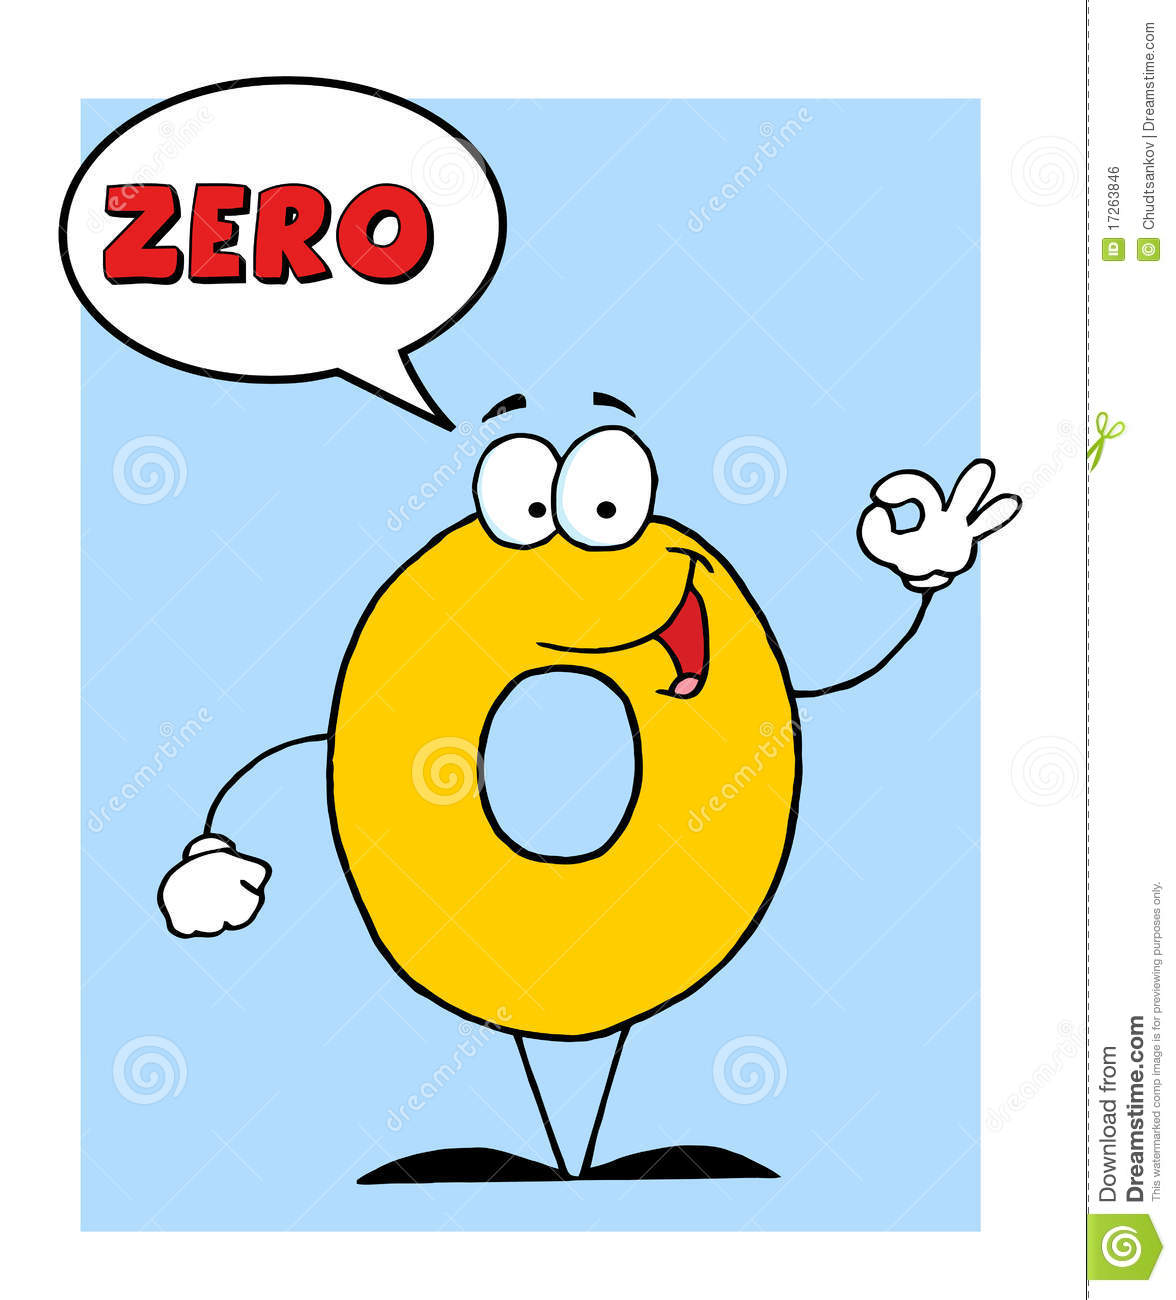 Number 0 Zero Guy With Speech Bubble Royalty Free Stock Image   Image    